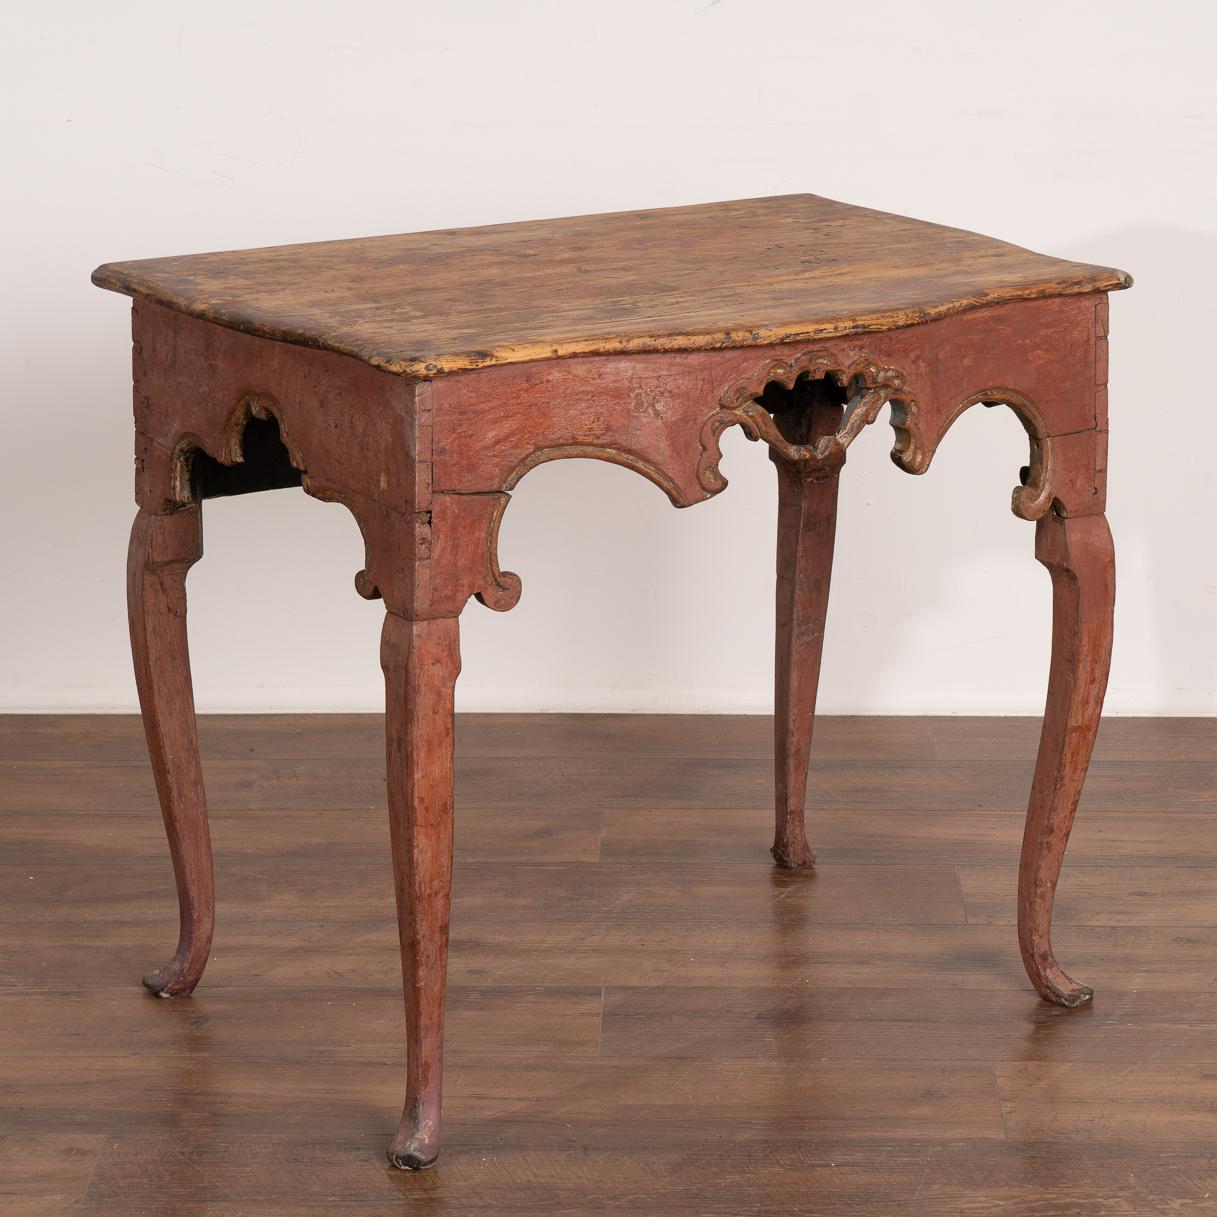 The original red painted finish has been gently distressed through generations of use, creating the wonderful worn patina found in this lovely rococo pine side table.
Note the decorative carving and slender long cabriolet legs that add a romantic